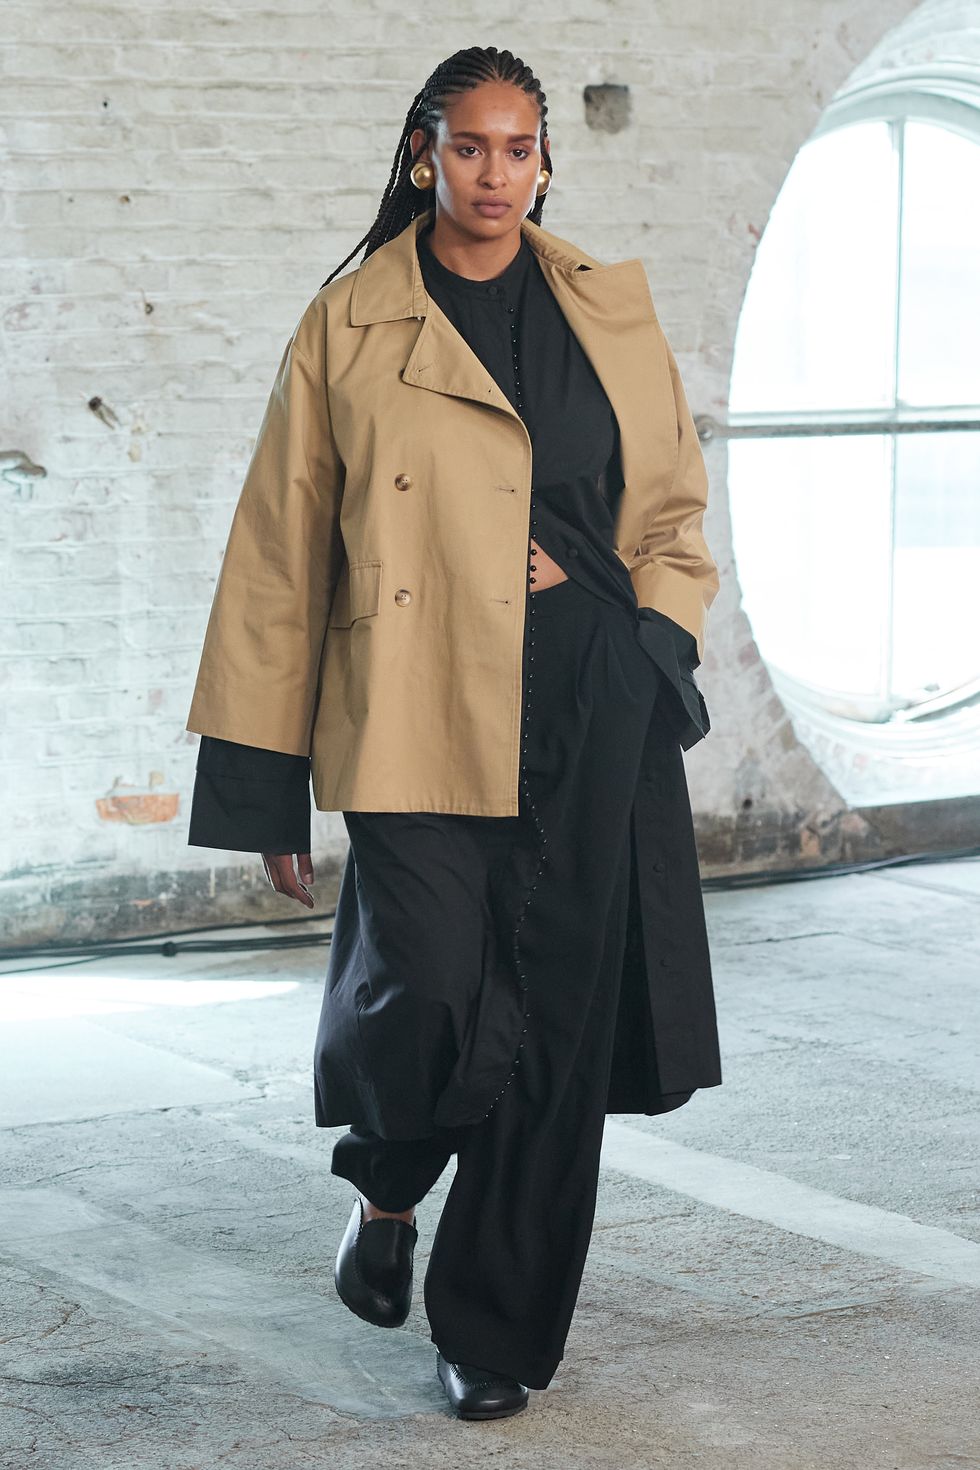 a model at lovechild 1979 wears a trench coat with black layers